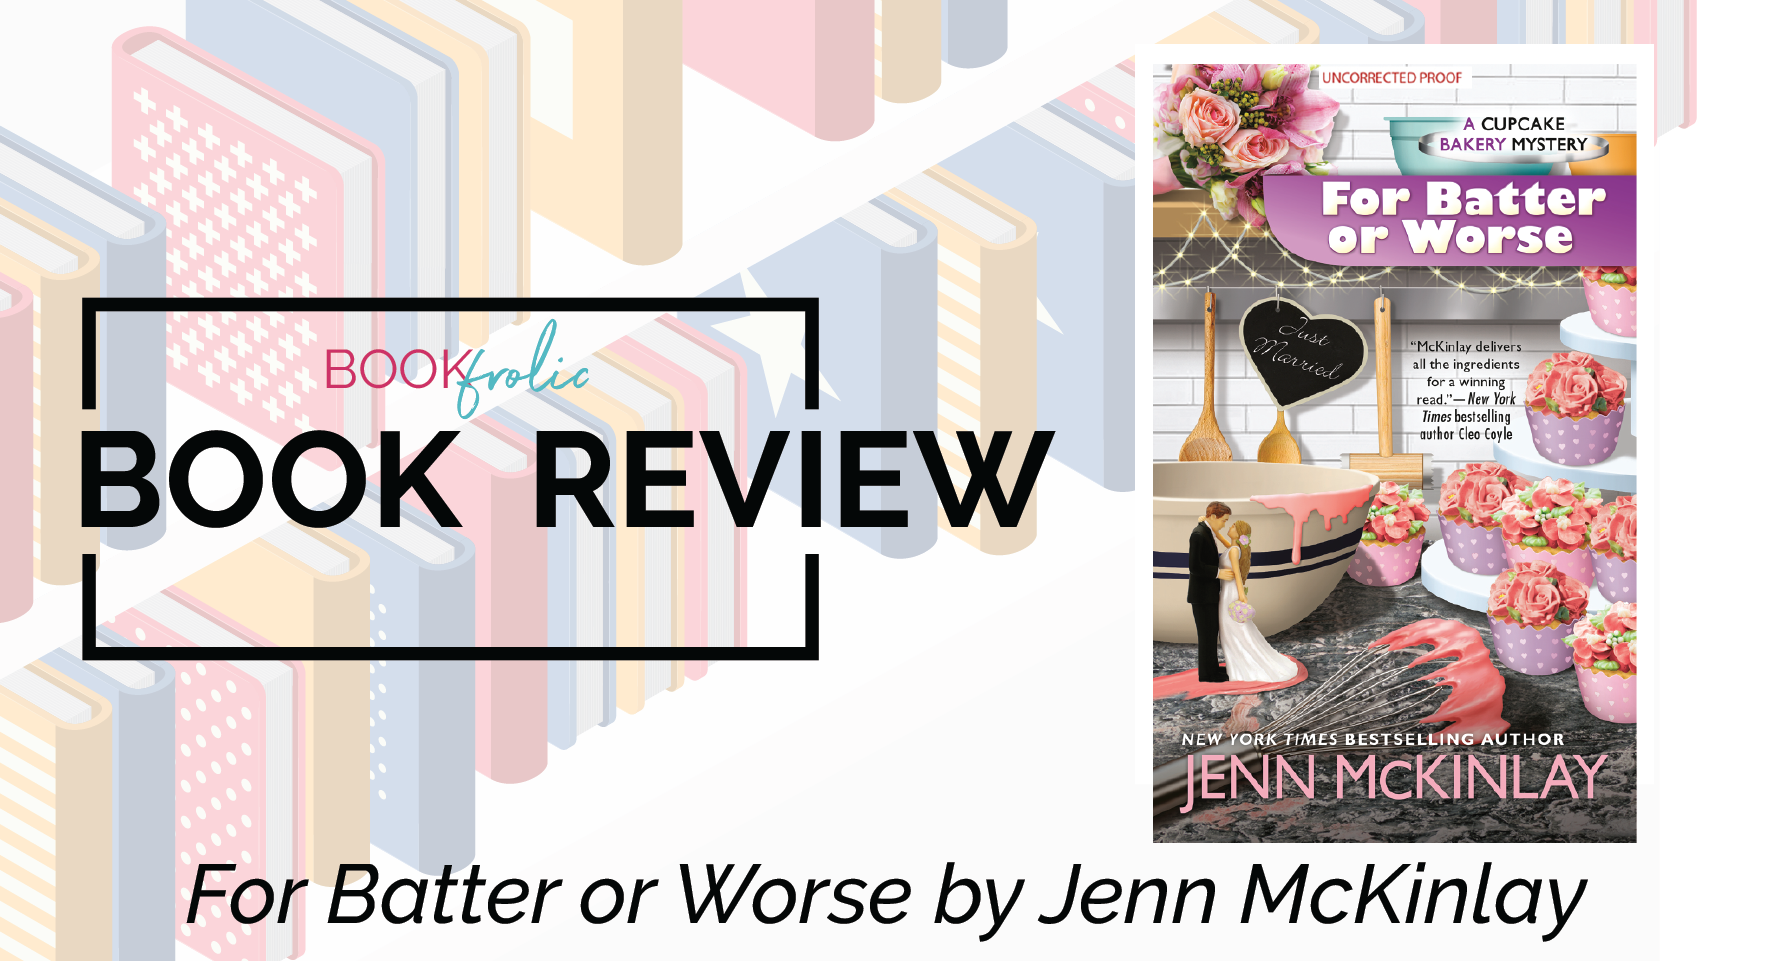 Review of For Batter or Worse by Jenn McKinlay